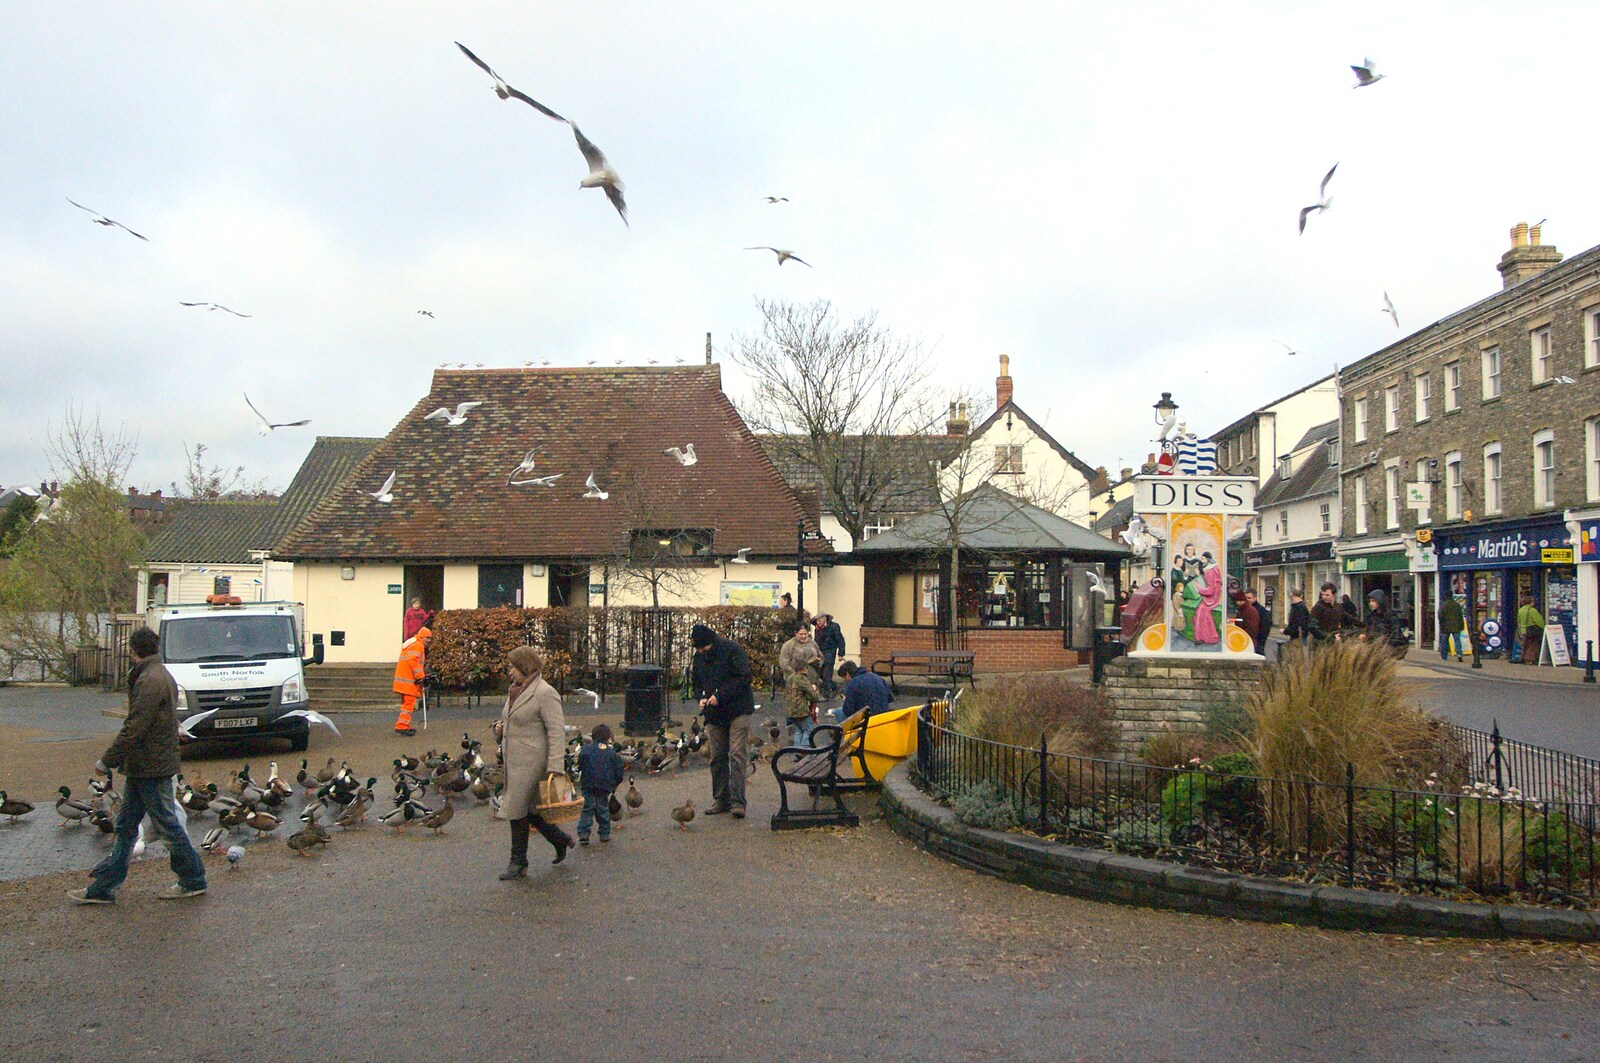 The Diss town sign, and whirling seagulls from Grandad's New House, and Discord by the Mere, Roydon and Diss, Norfolk - 21st December 2011